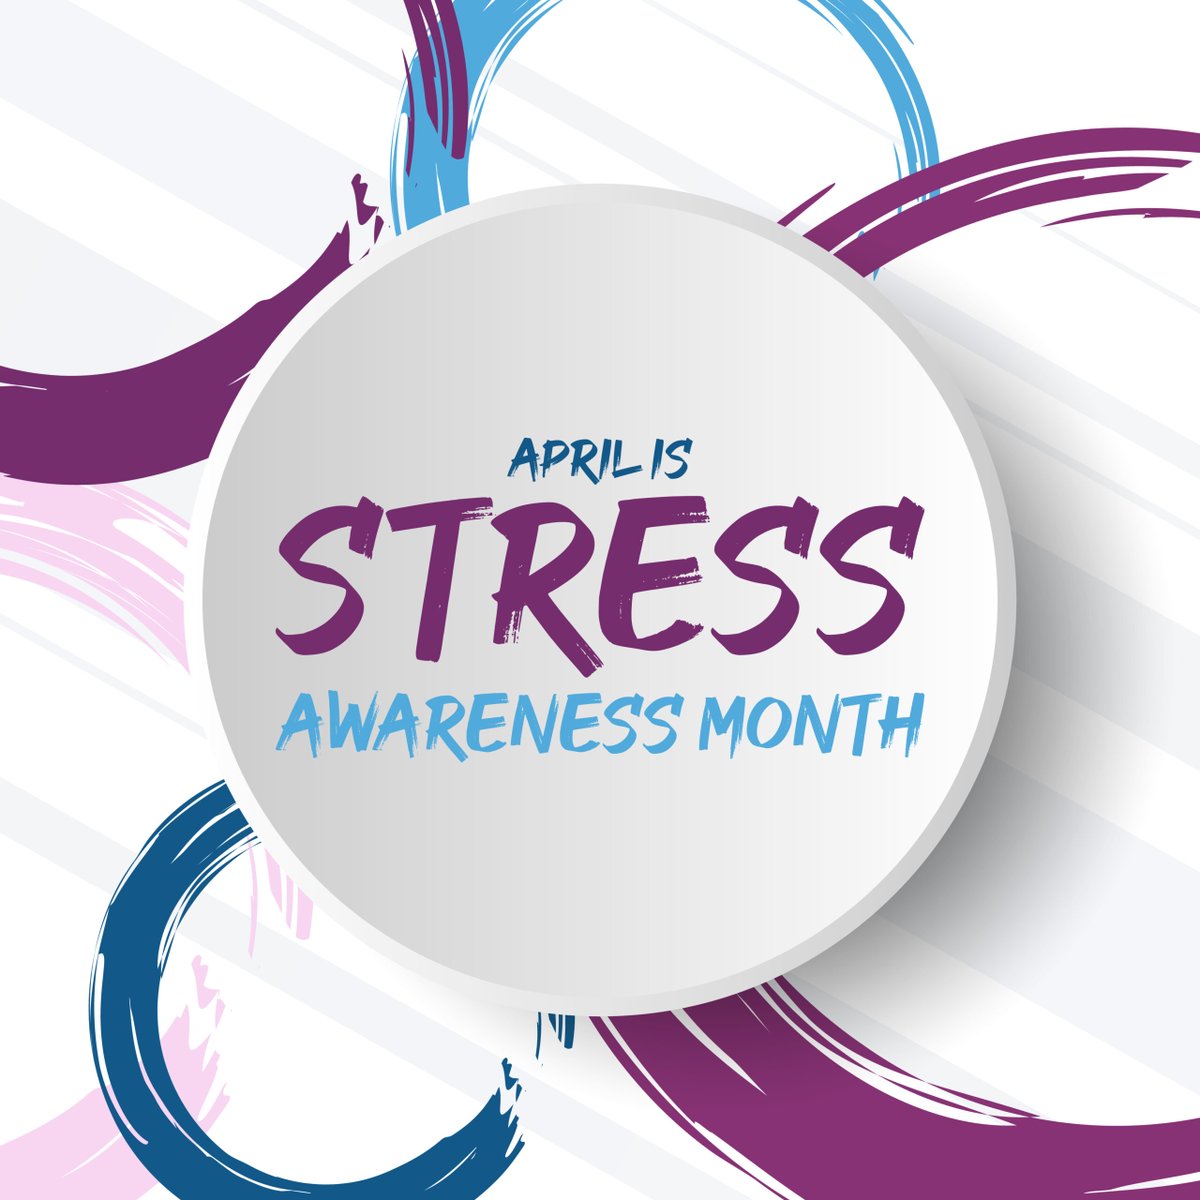 April is National Stress Awareness Month! Stress can impact more than just your sleep and digestion—it can affect your eyes too. It's important to understand how stress may exacerbate symptoms within the eyes. aao.org/eye-health/tip… #ophthalmologist #ophthalmology #eyehealth